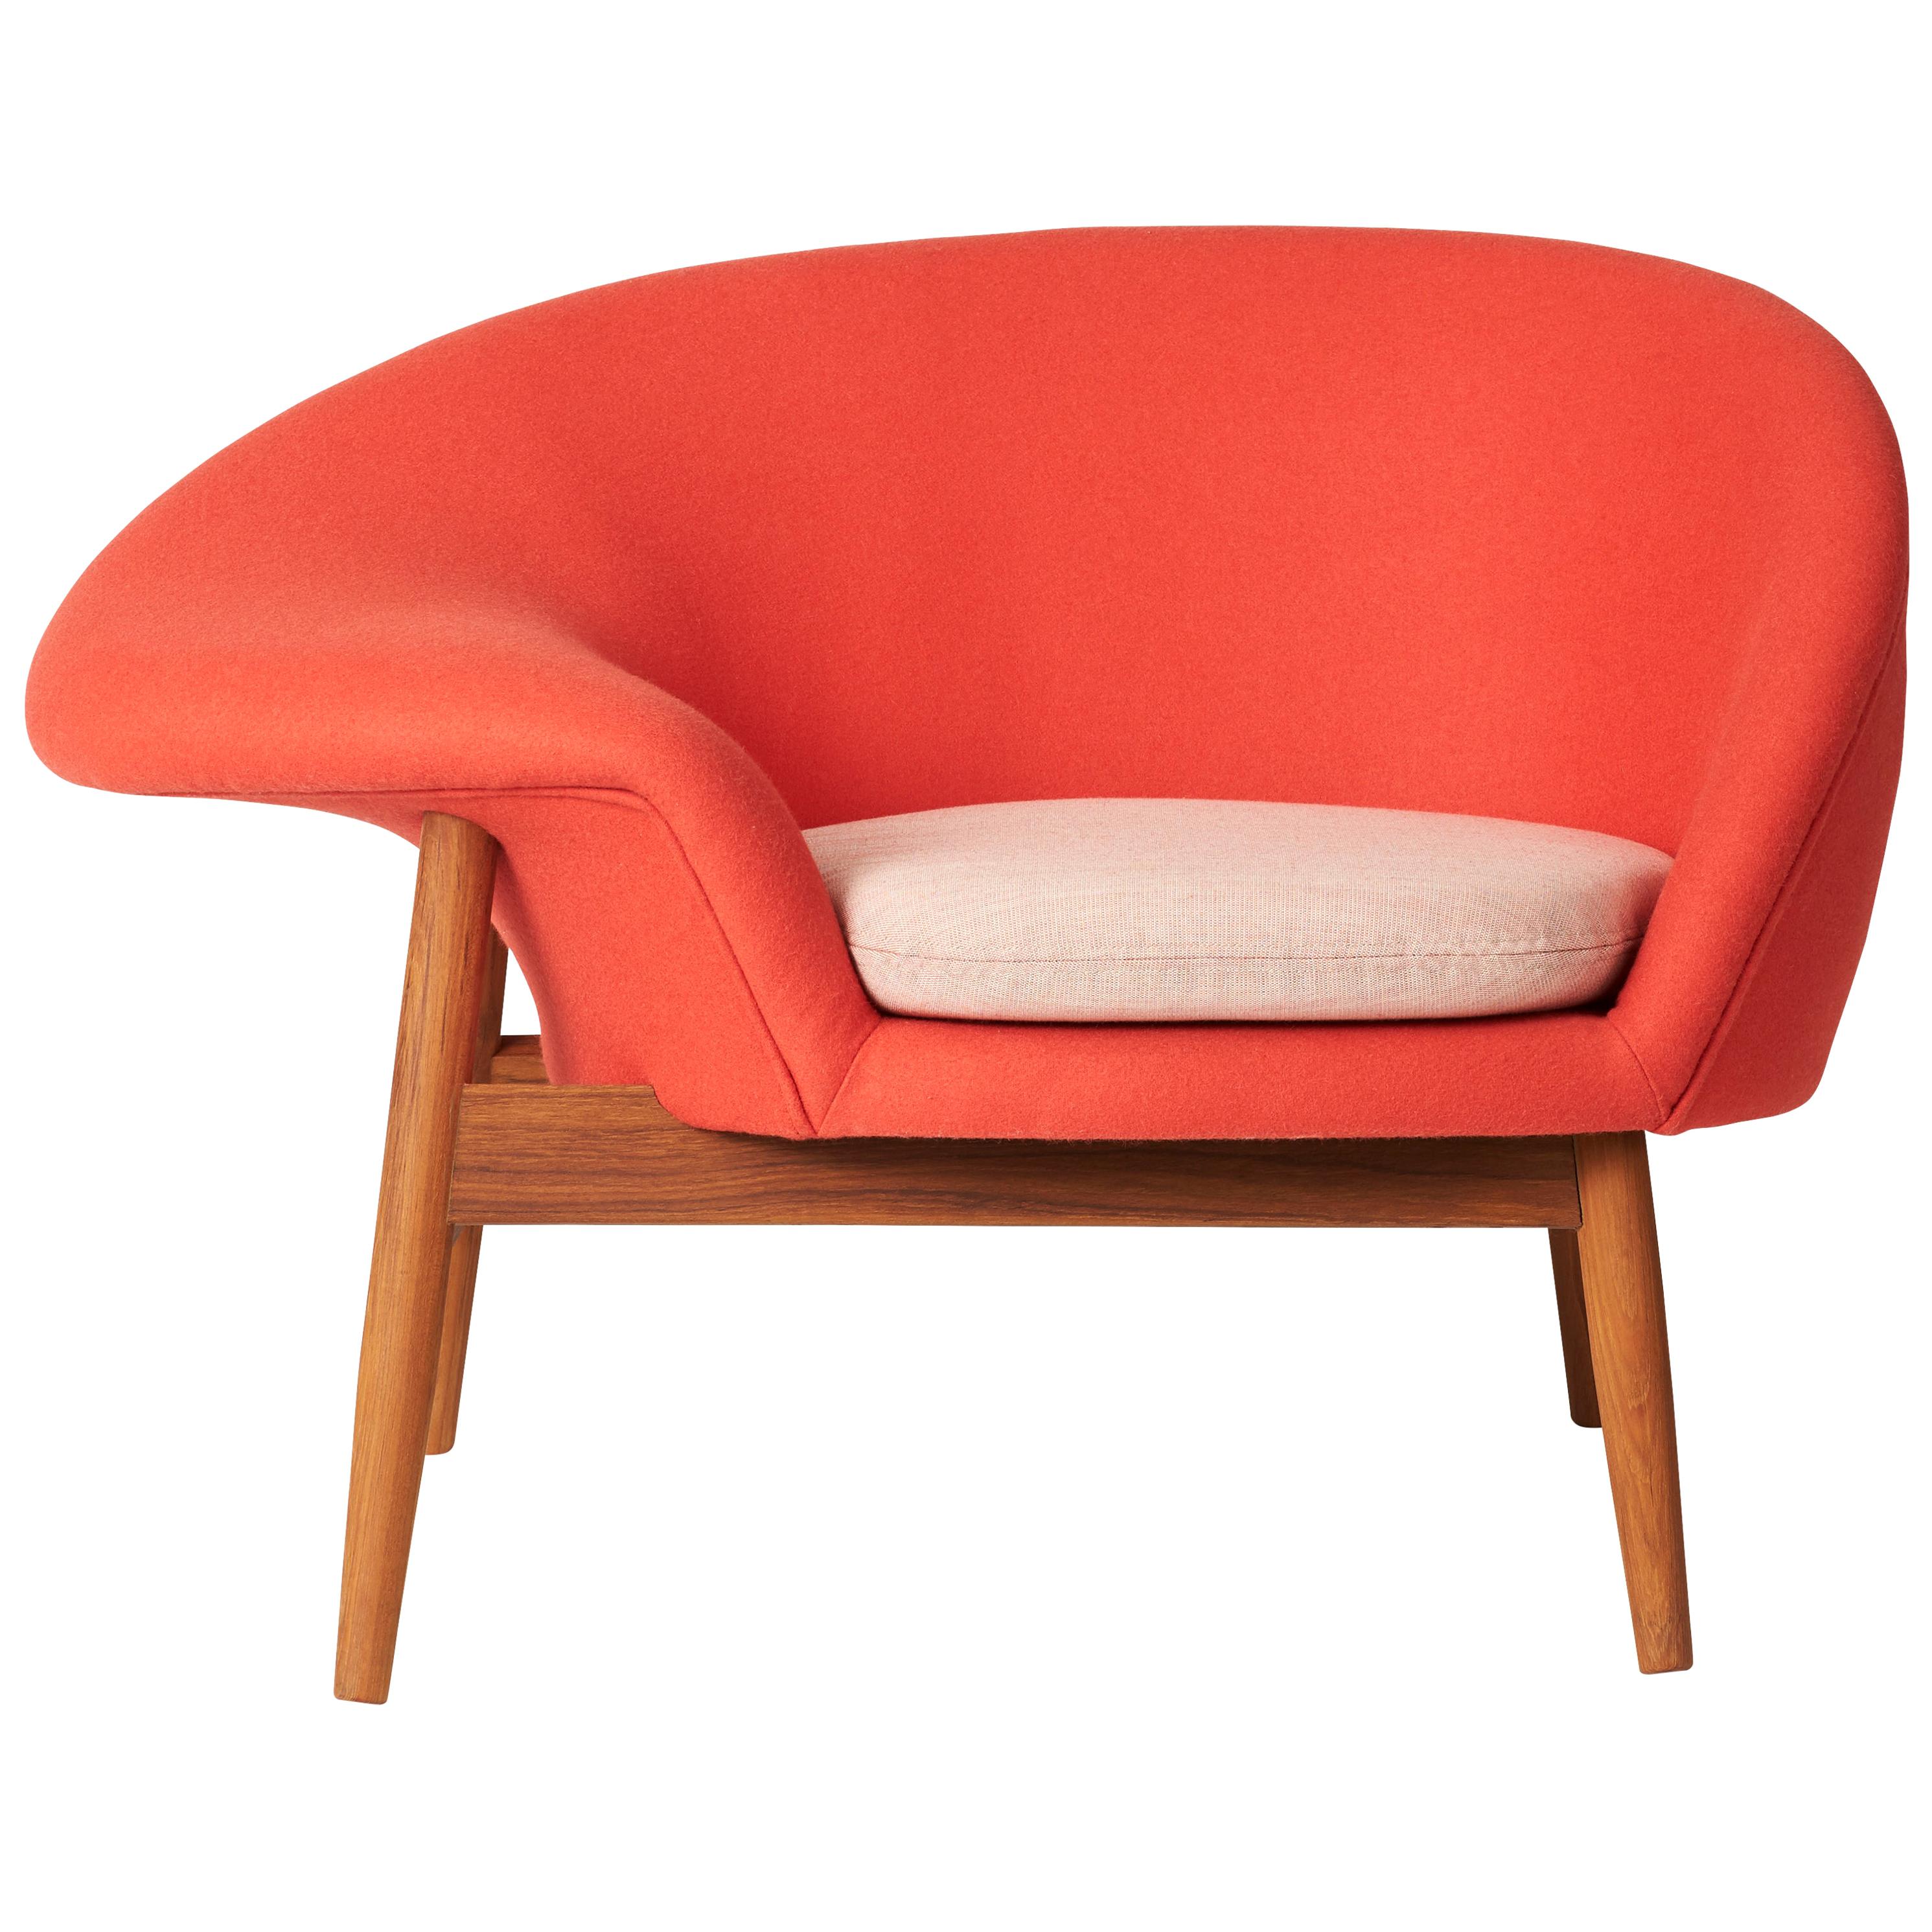 Fried Egg Two-Tone Chair, by Hans Olsen from Warm Nordic